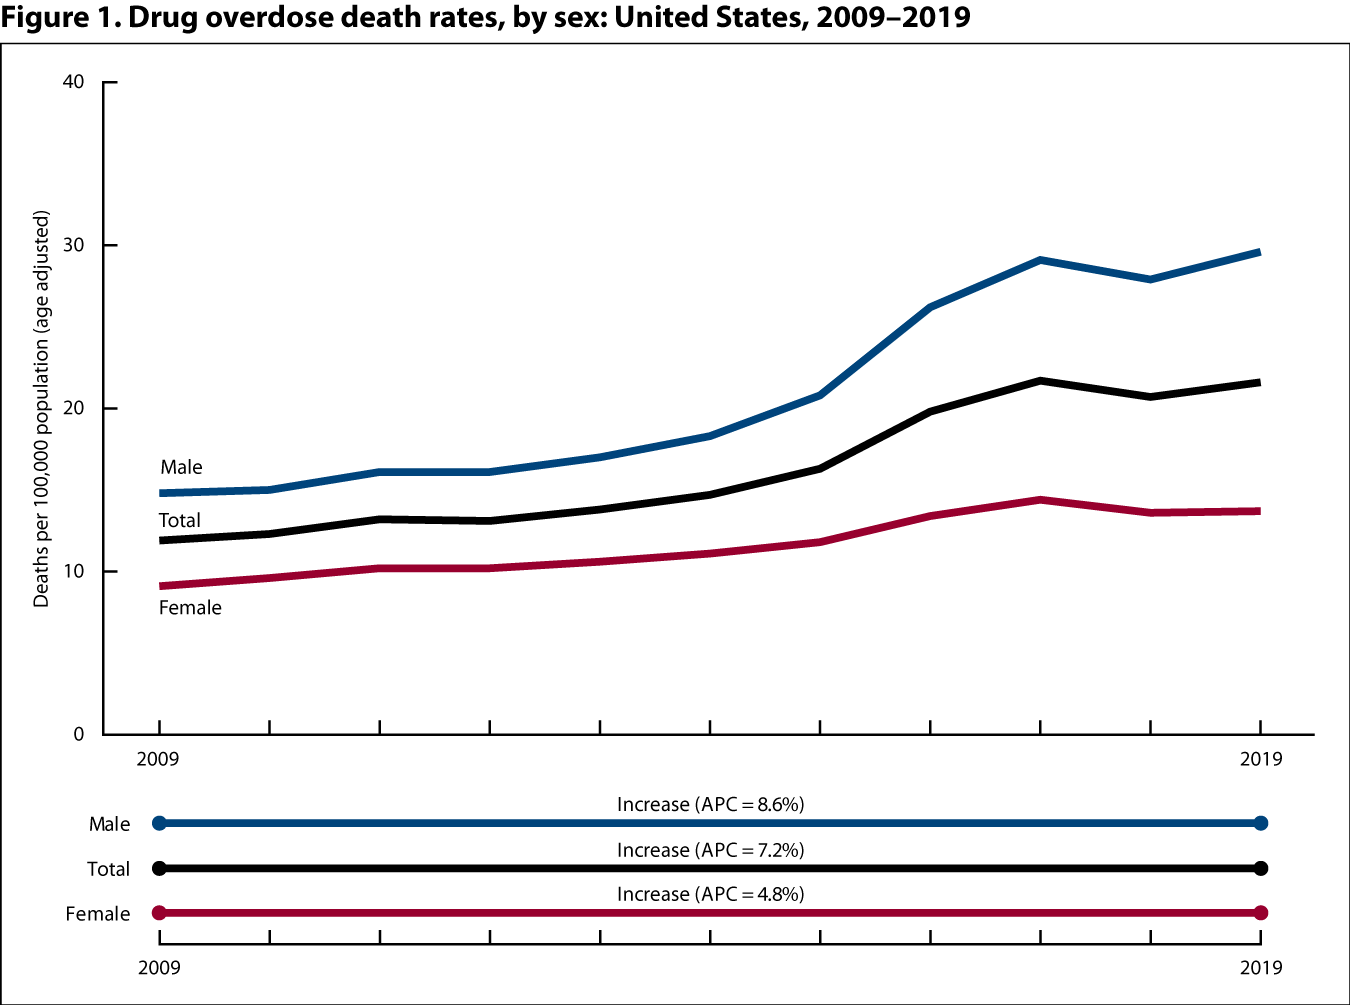 Figure 1 is a line graph showing drug overdose death rates (deaths per 100,000 population) by sex for 2009 through 2019.